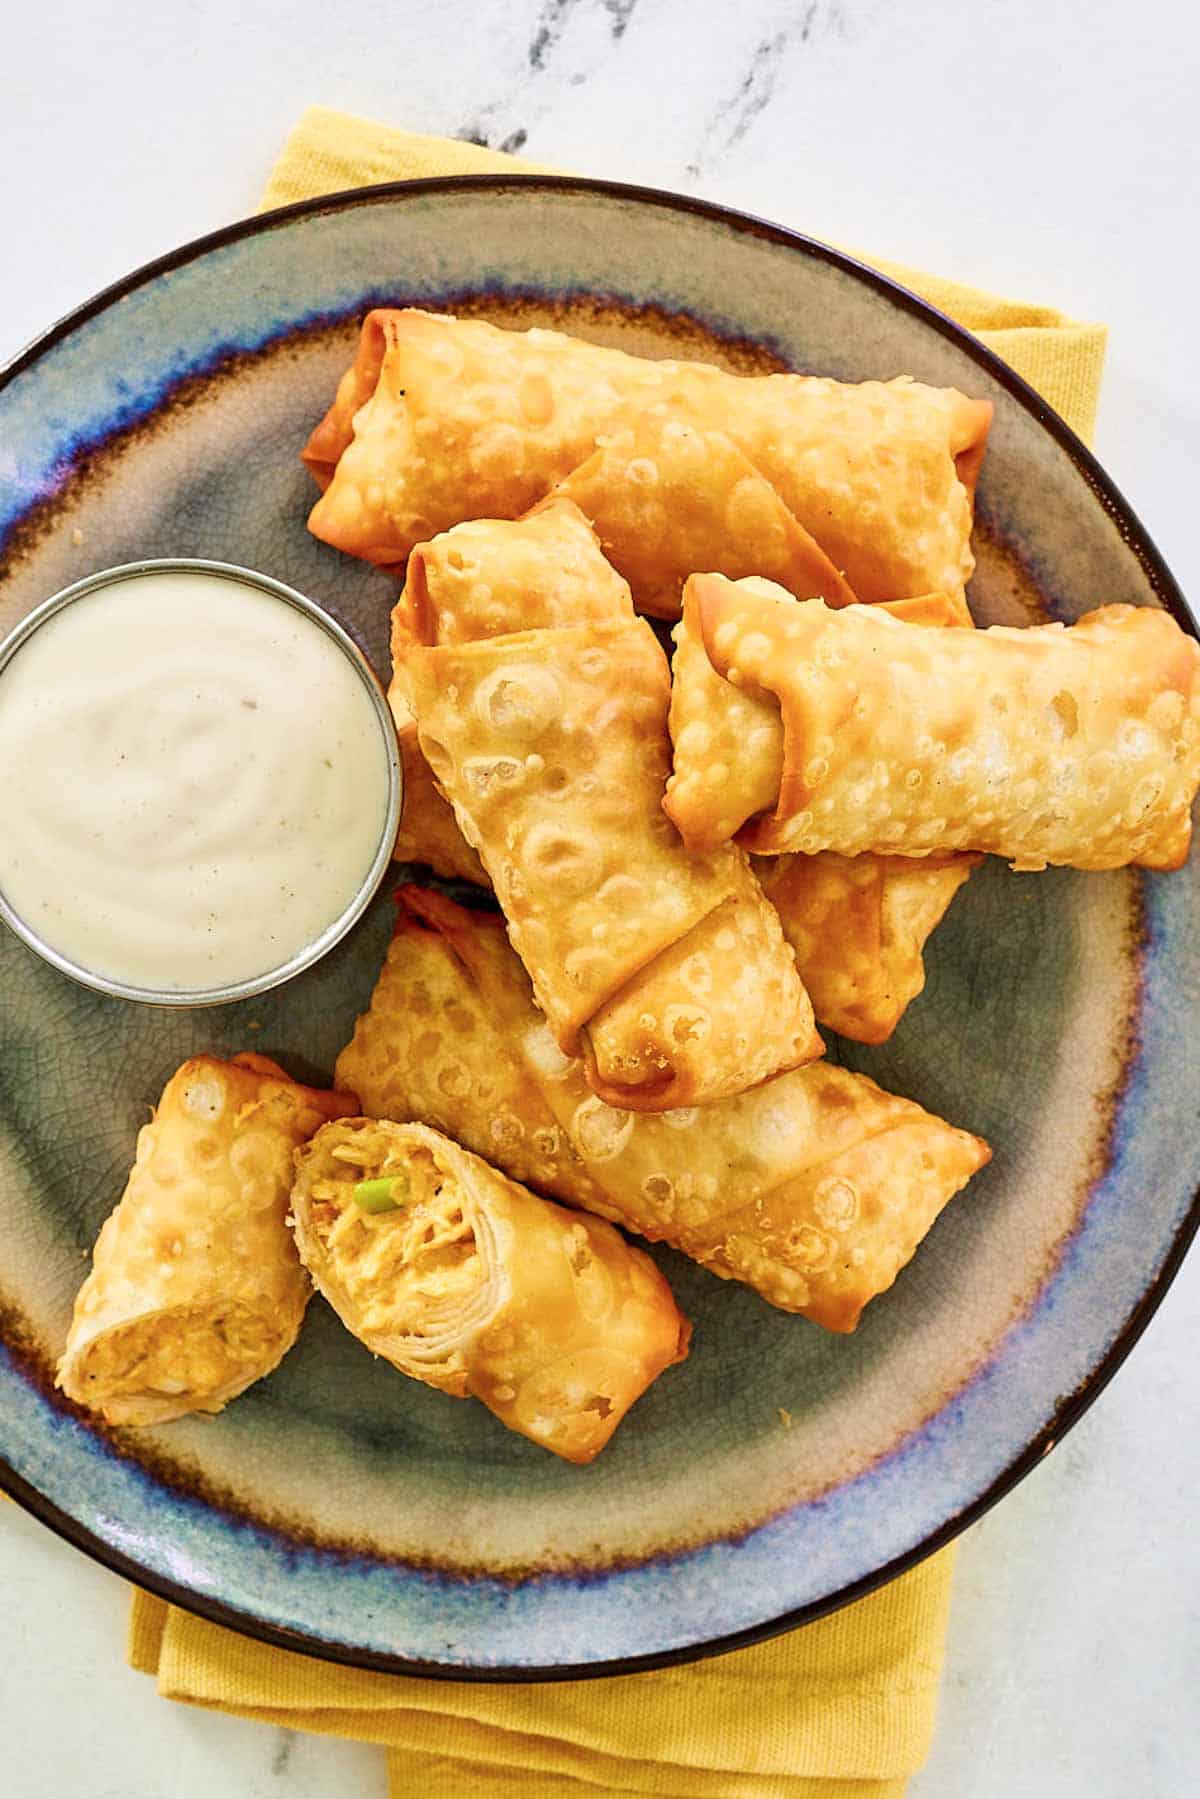 Buffalo chicken egg rolls and dipping sauce on a plate.